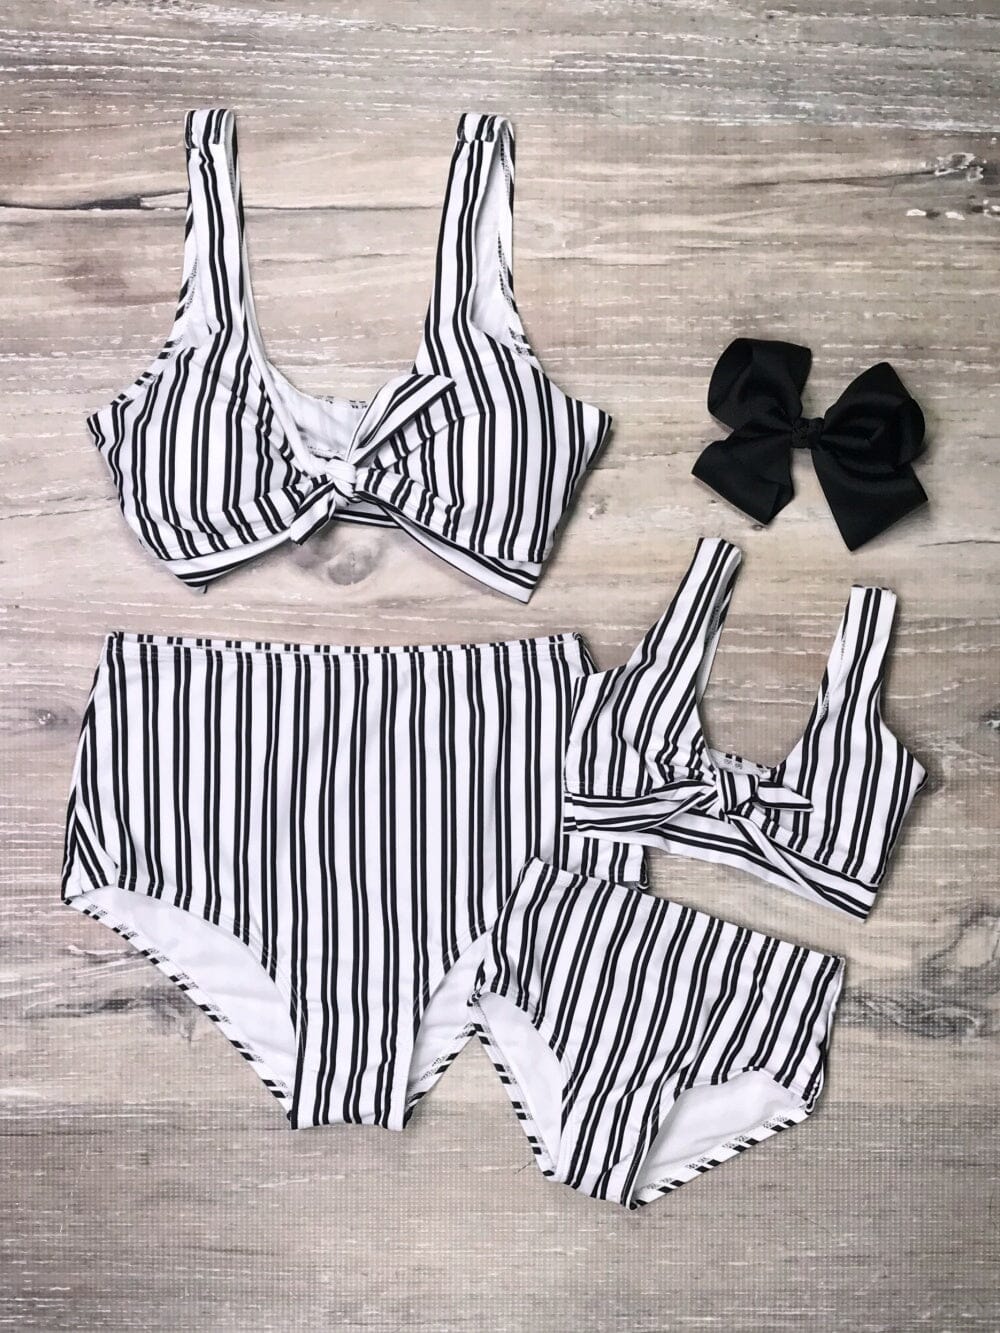 Mommy and Me Swimsuits - Black & White Stripe Tie Matching Two Piece Bikini - Sydney So Sweet